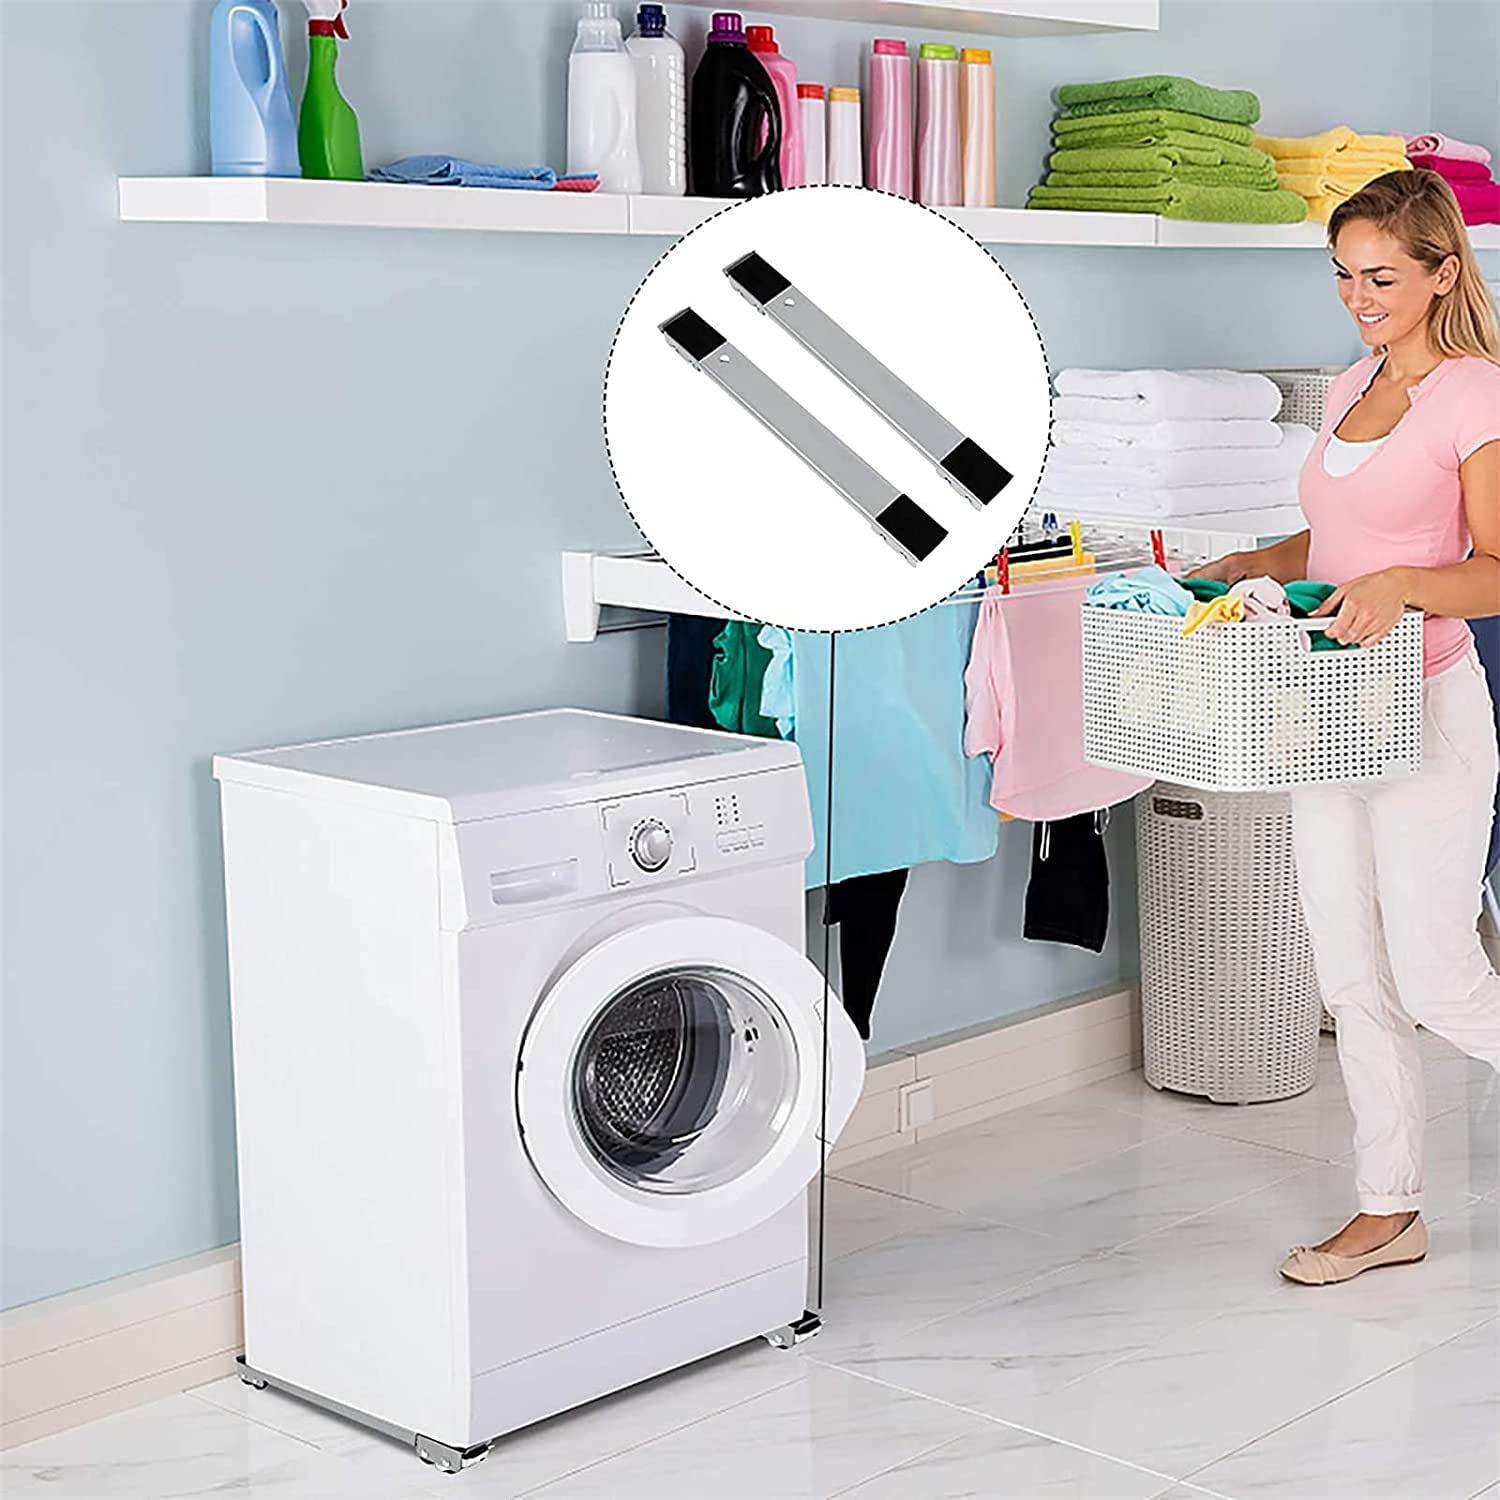 VIO washing machine refrigerator mobile base, washing machine stand multi-functional movable adjustable base, adjustable appliances roller pairs heavy duty, for Dryer and Refrigerator(1 PAIR) (2 PCS)